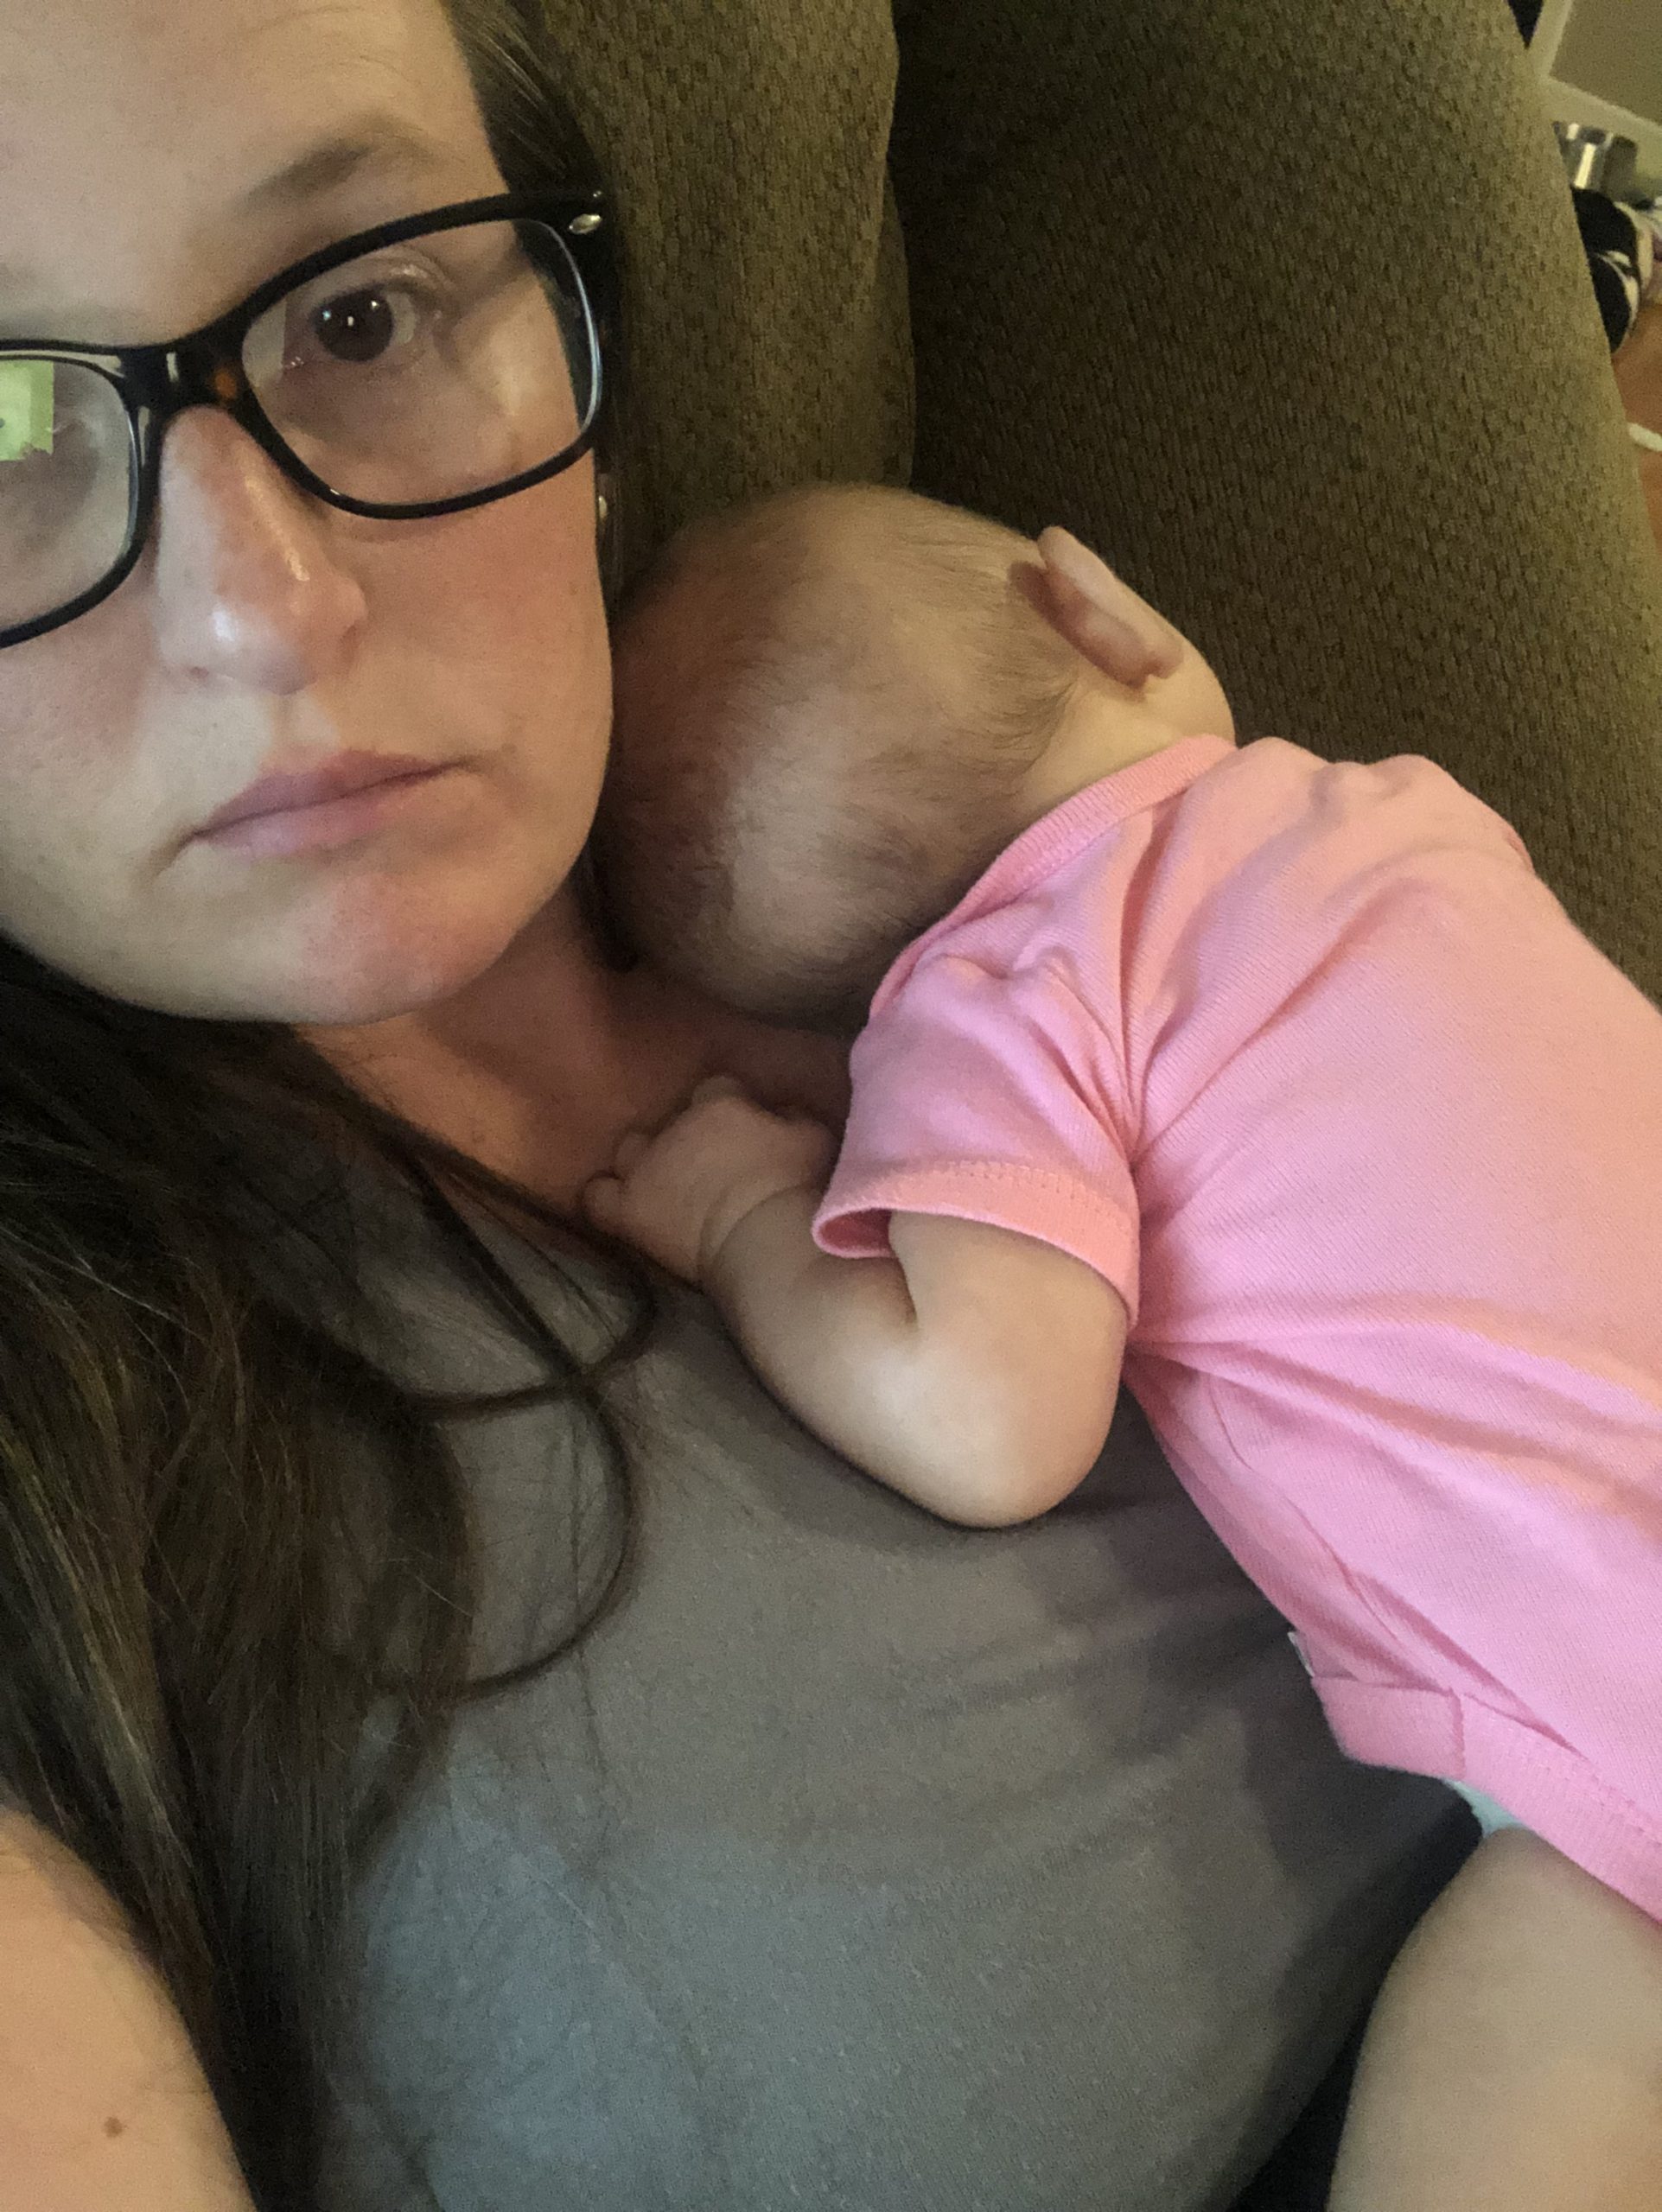 exhausted baby and mom